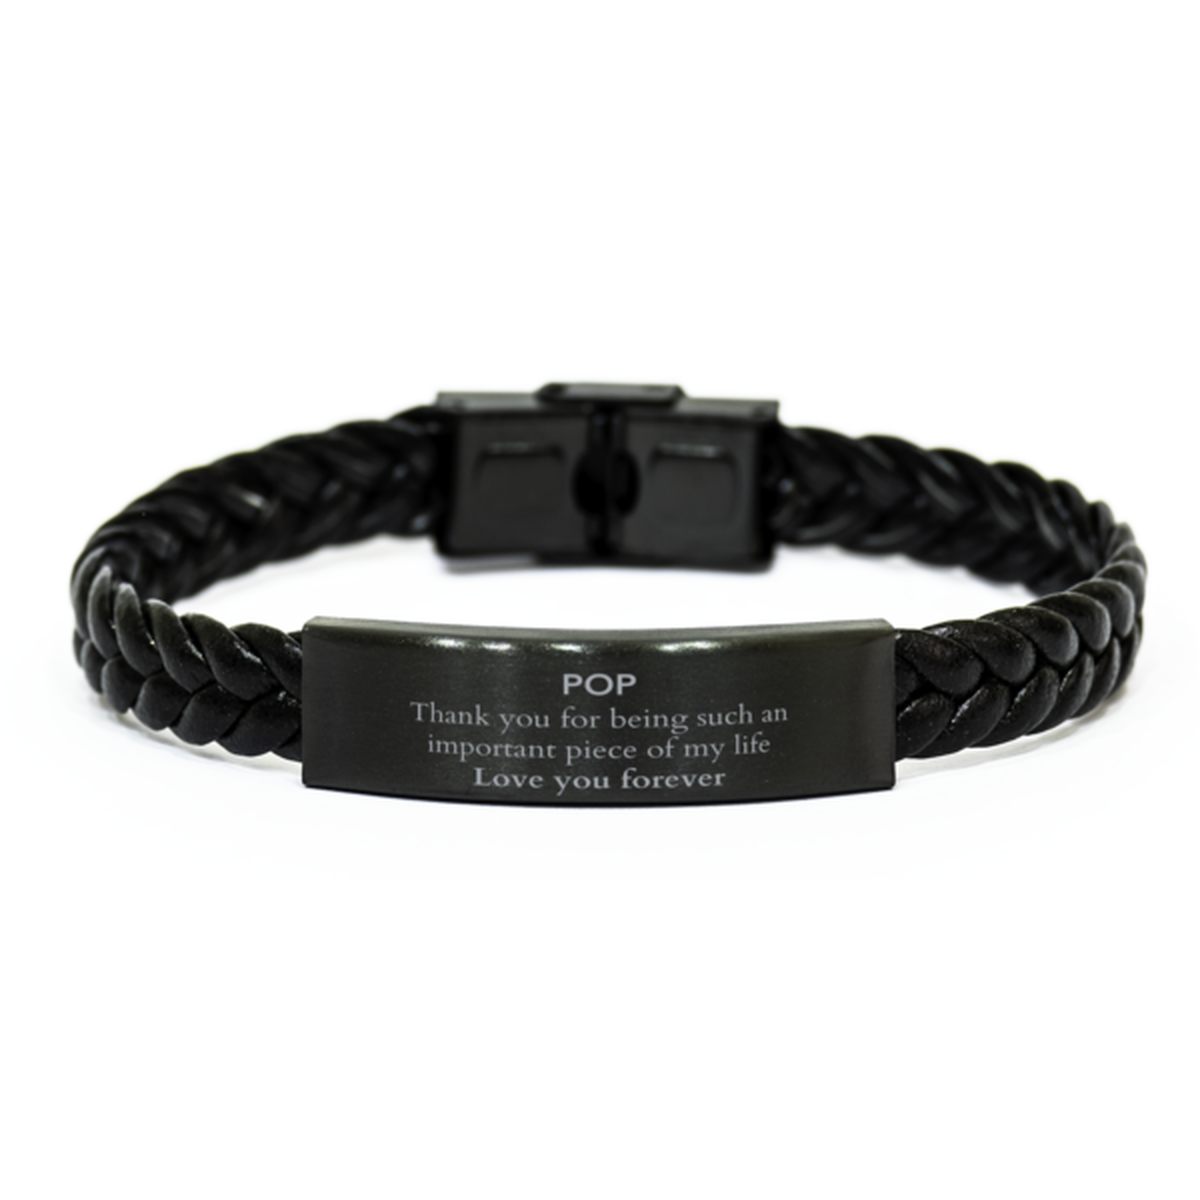 Appropriate Pop Braided Leather Bracelet Epic Birthday Gifts for Pop Thank you for being such an important piece of my life Pop Christmas Mothers Fathers Day